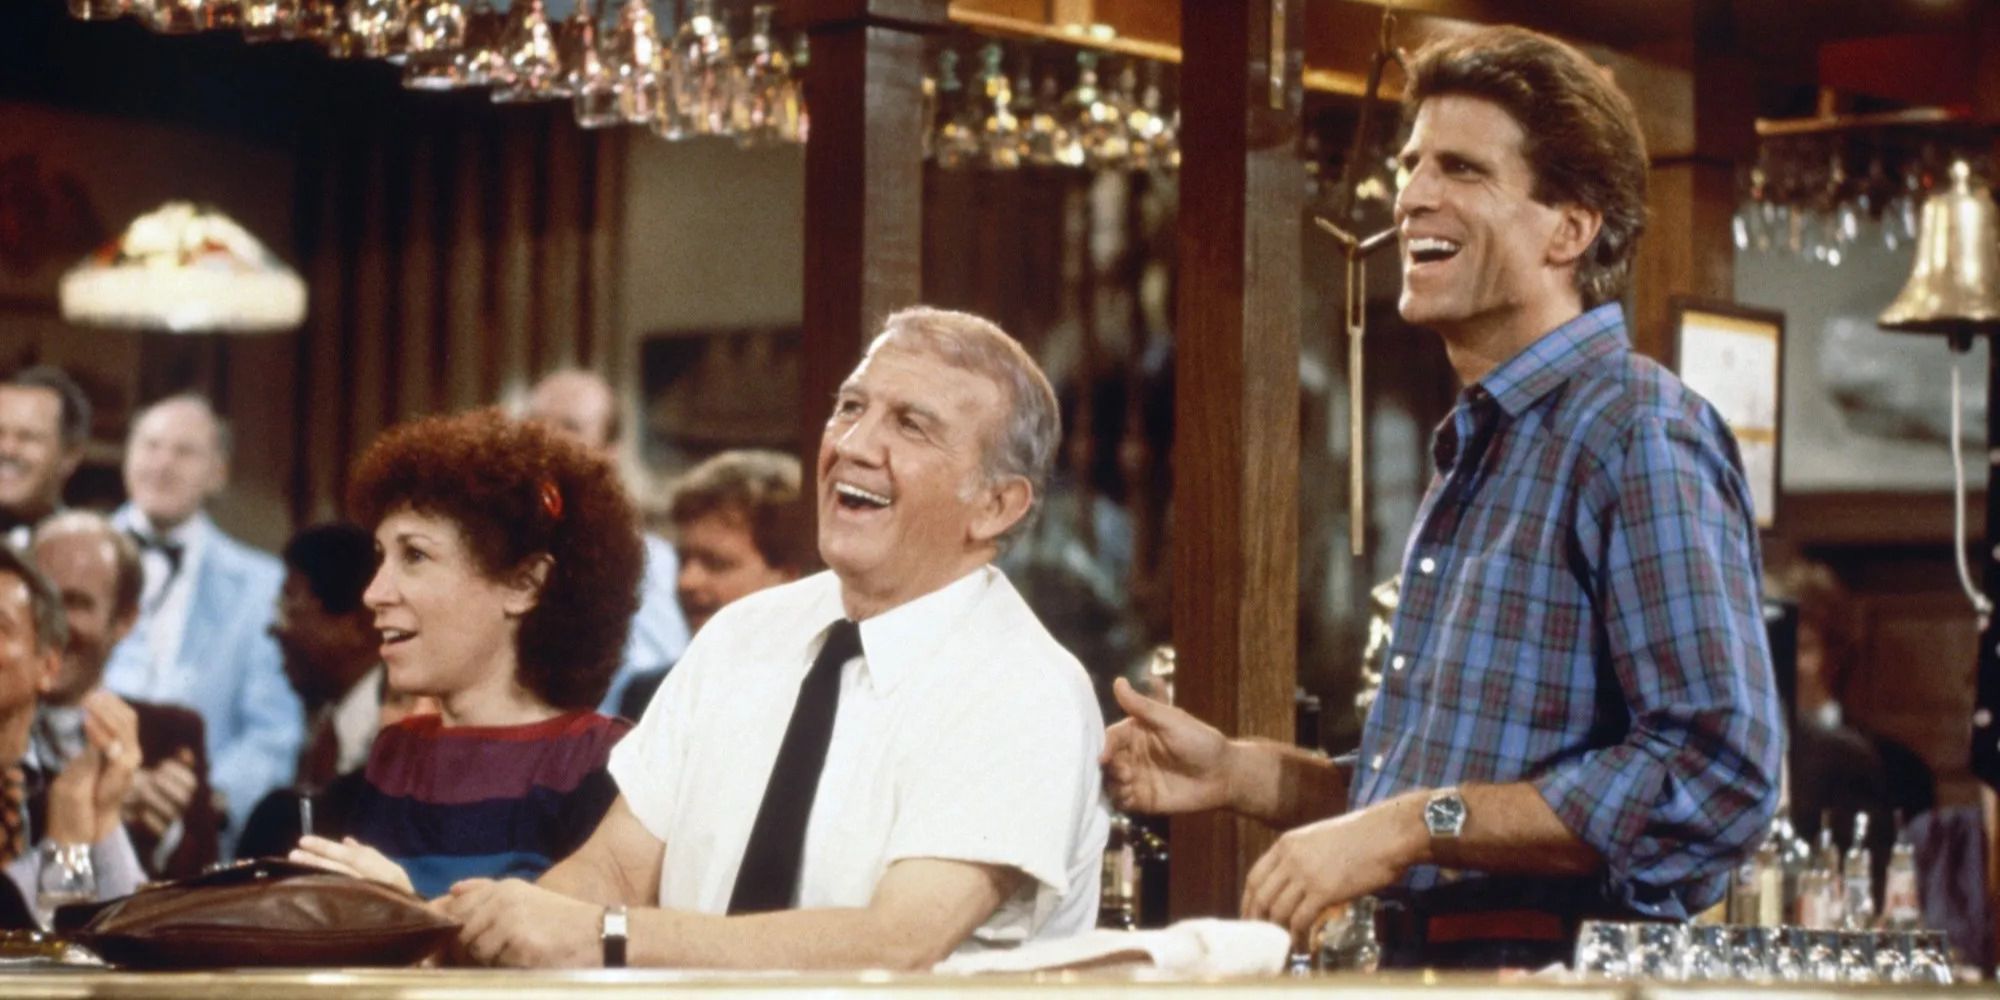 Sam (Ted Danson), Carla (Rhea Perlman), and Coach (Nicholas Colasanto) standing by the bar and laughing in Cheers